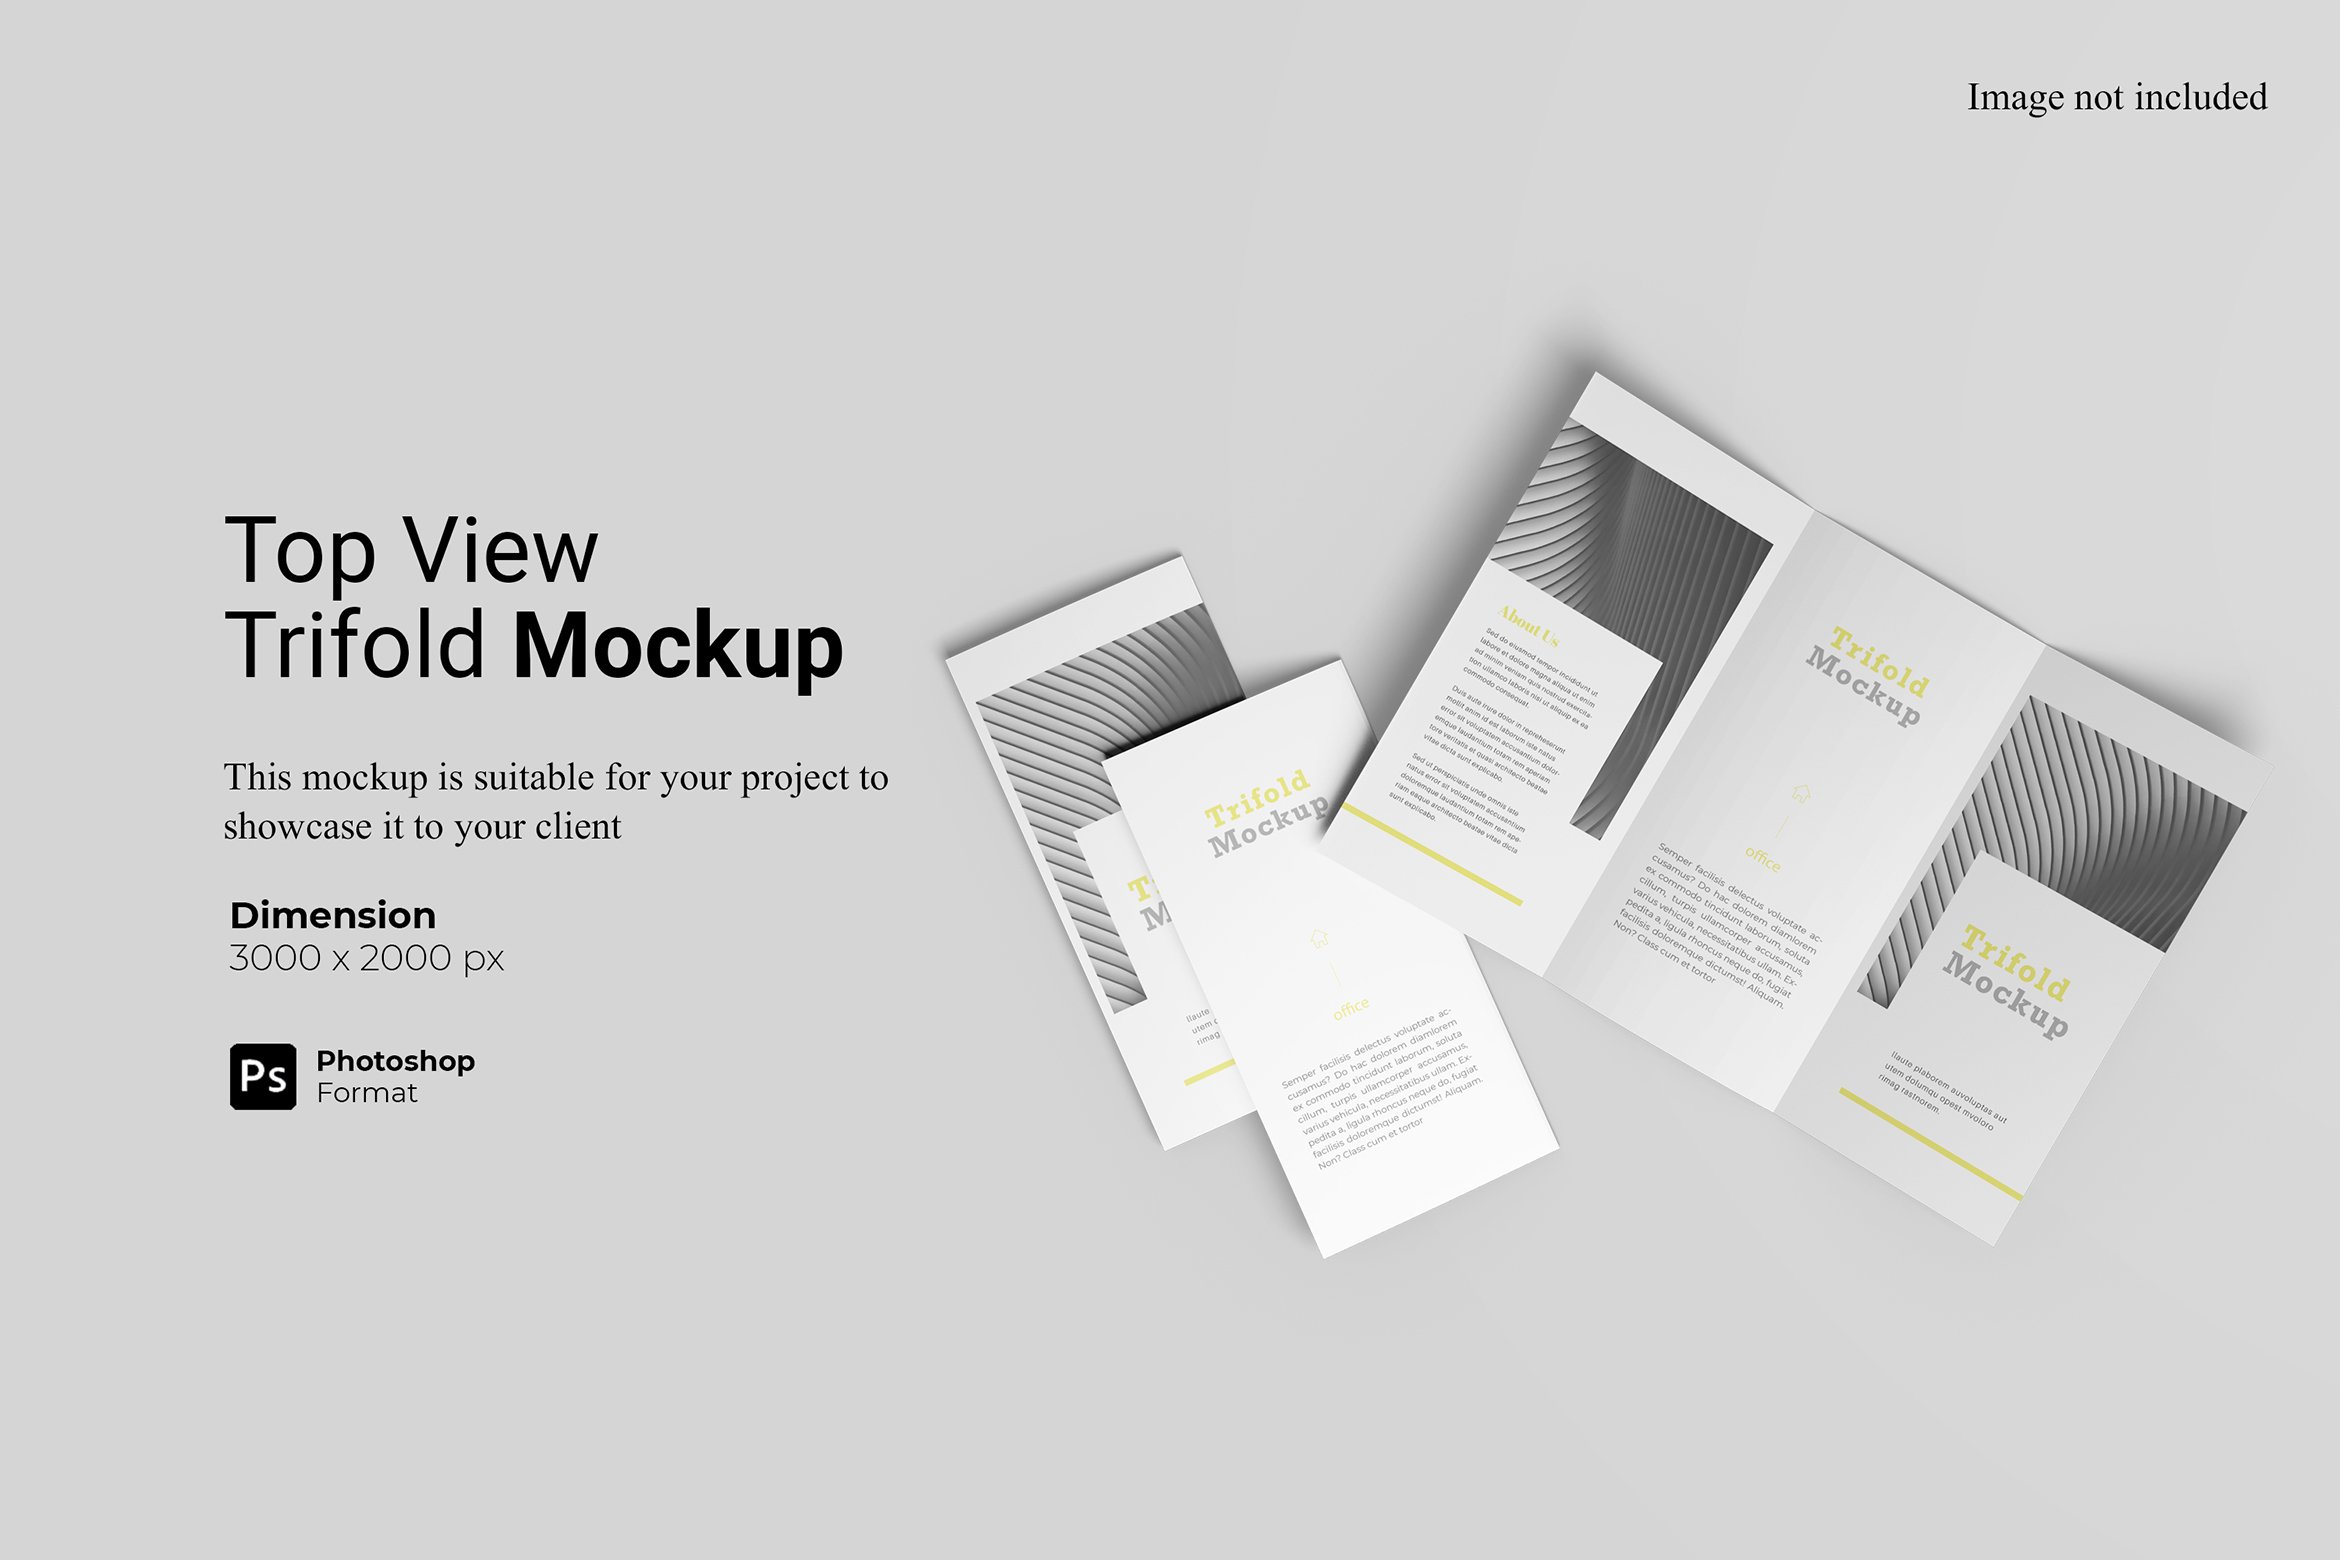 Top View Trifold Mockup cover image.